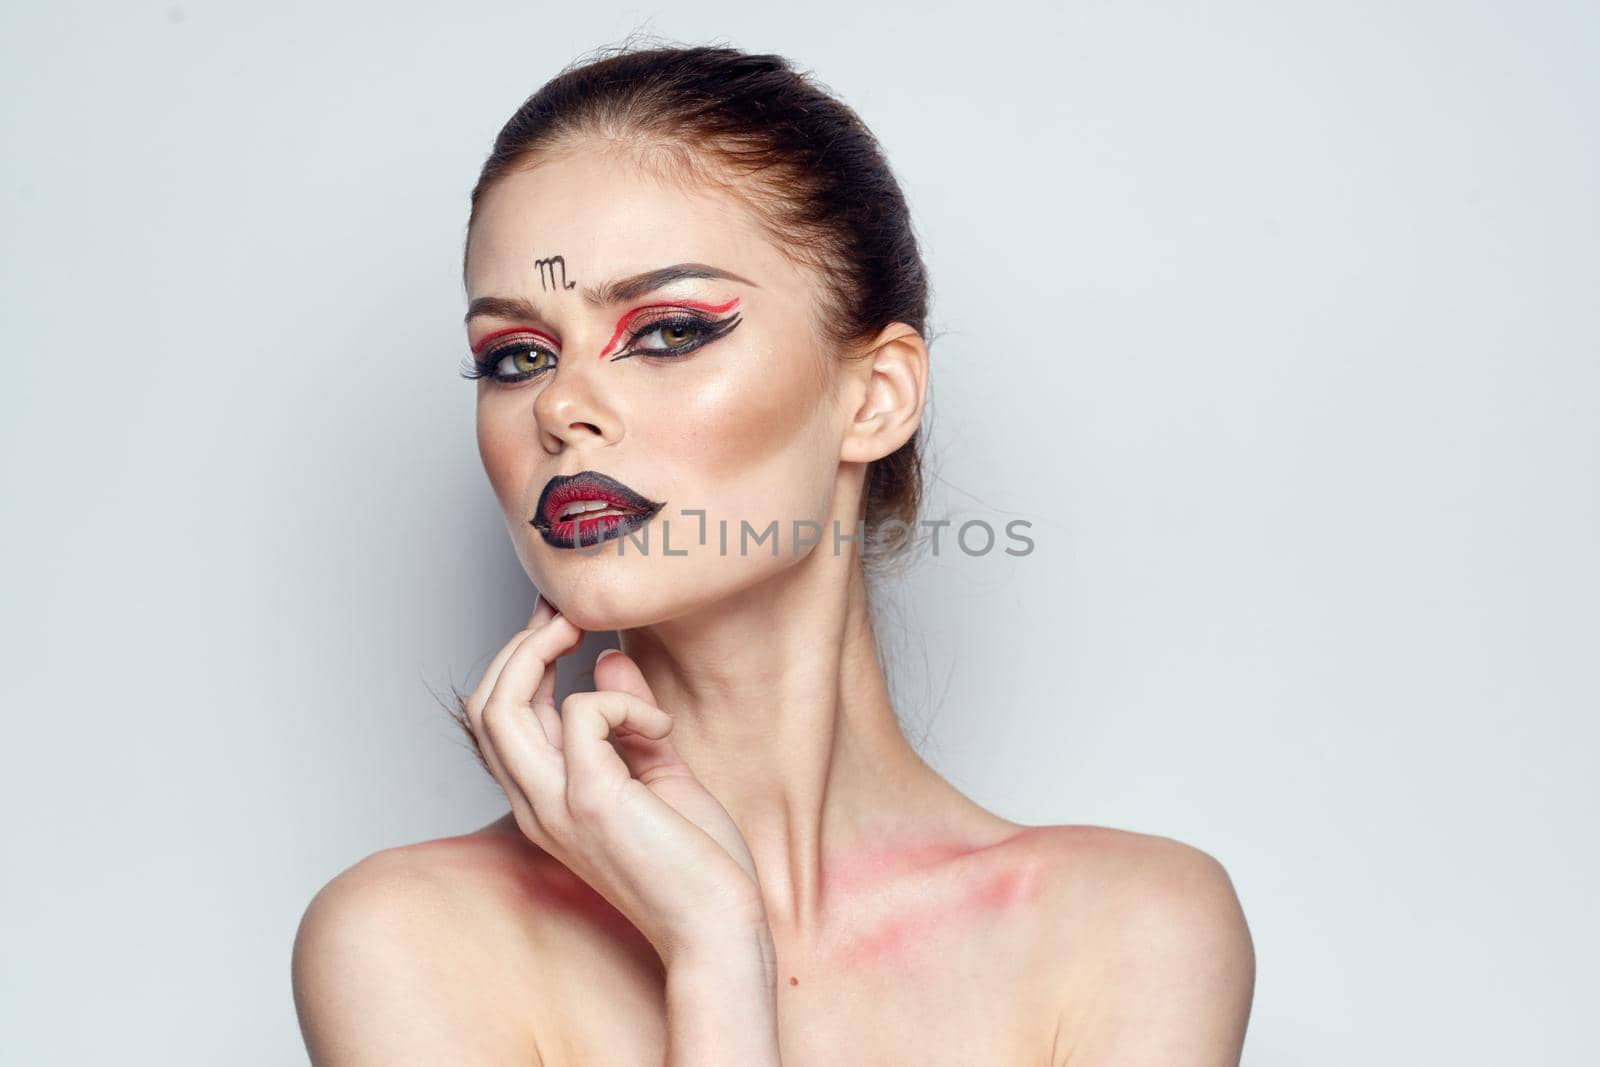 attractive woman posing scorpio sign on forehead cosmetics light background. High quality photo